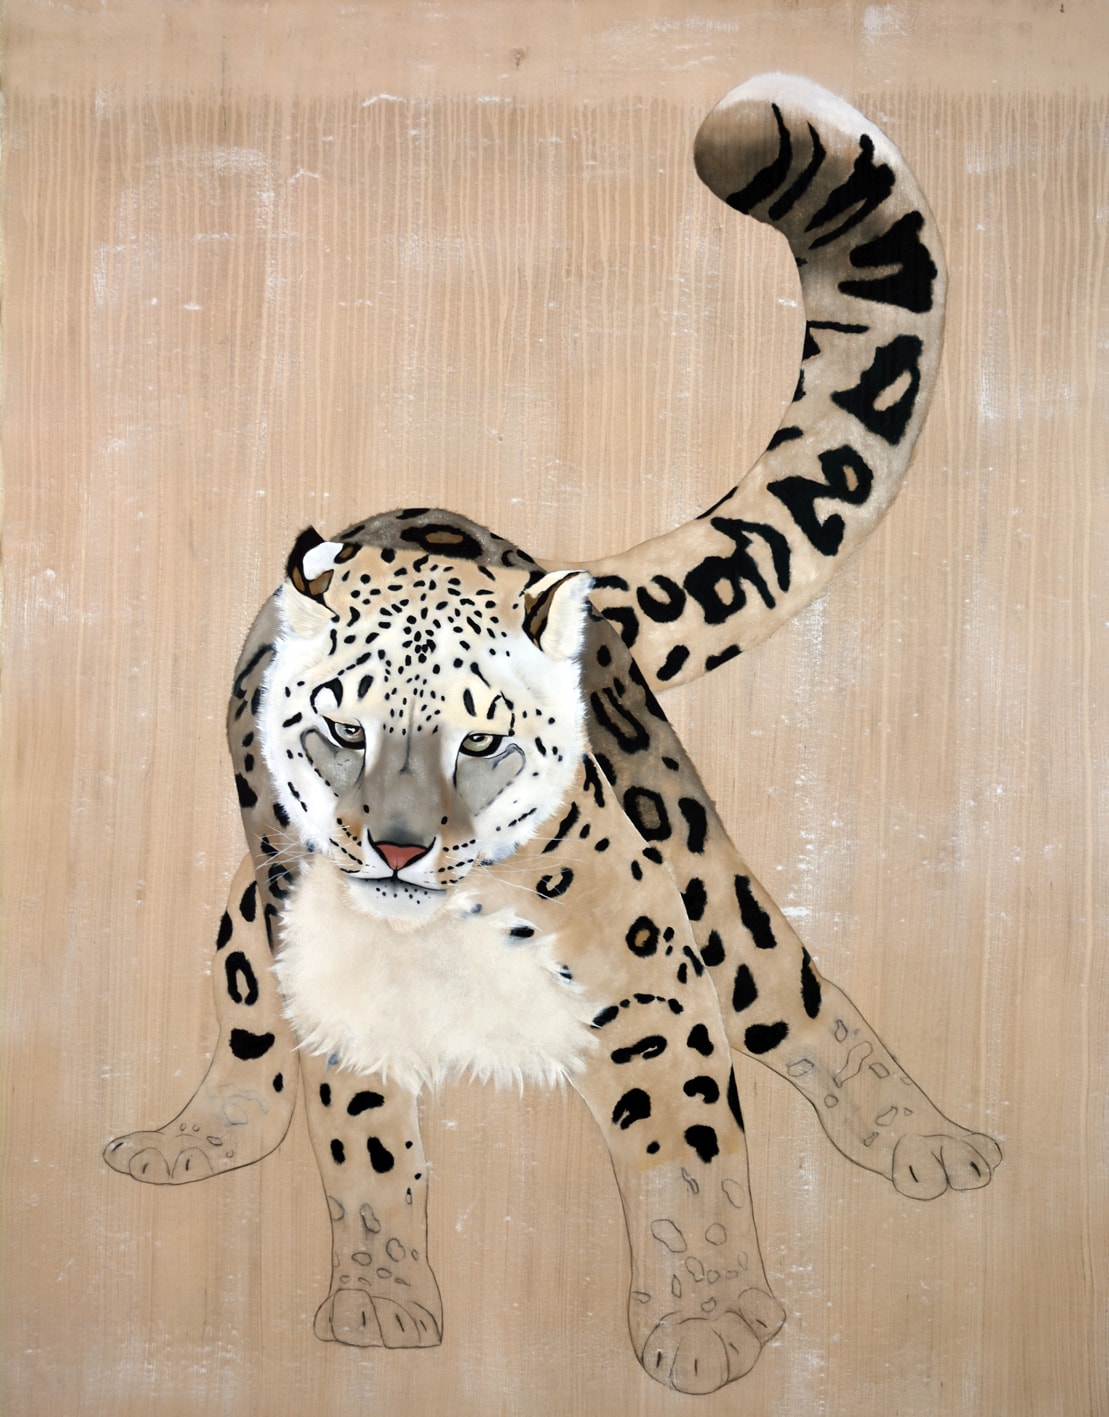 PANTHERA UNCIA snow-leopard-panthera-uncia-ounce-threatened-endangered-extinction Thierry Bisch Contemporary painter animals painting art decoration nature biodiversity conservation